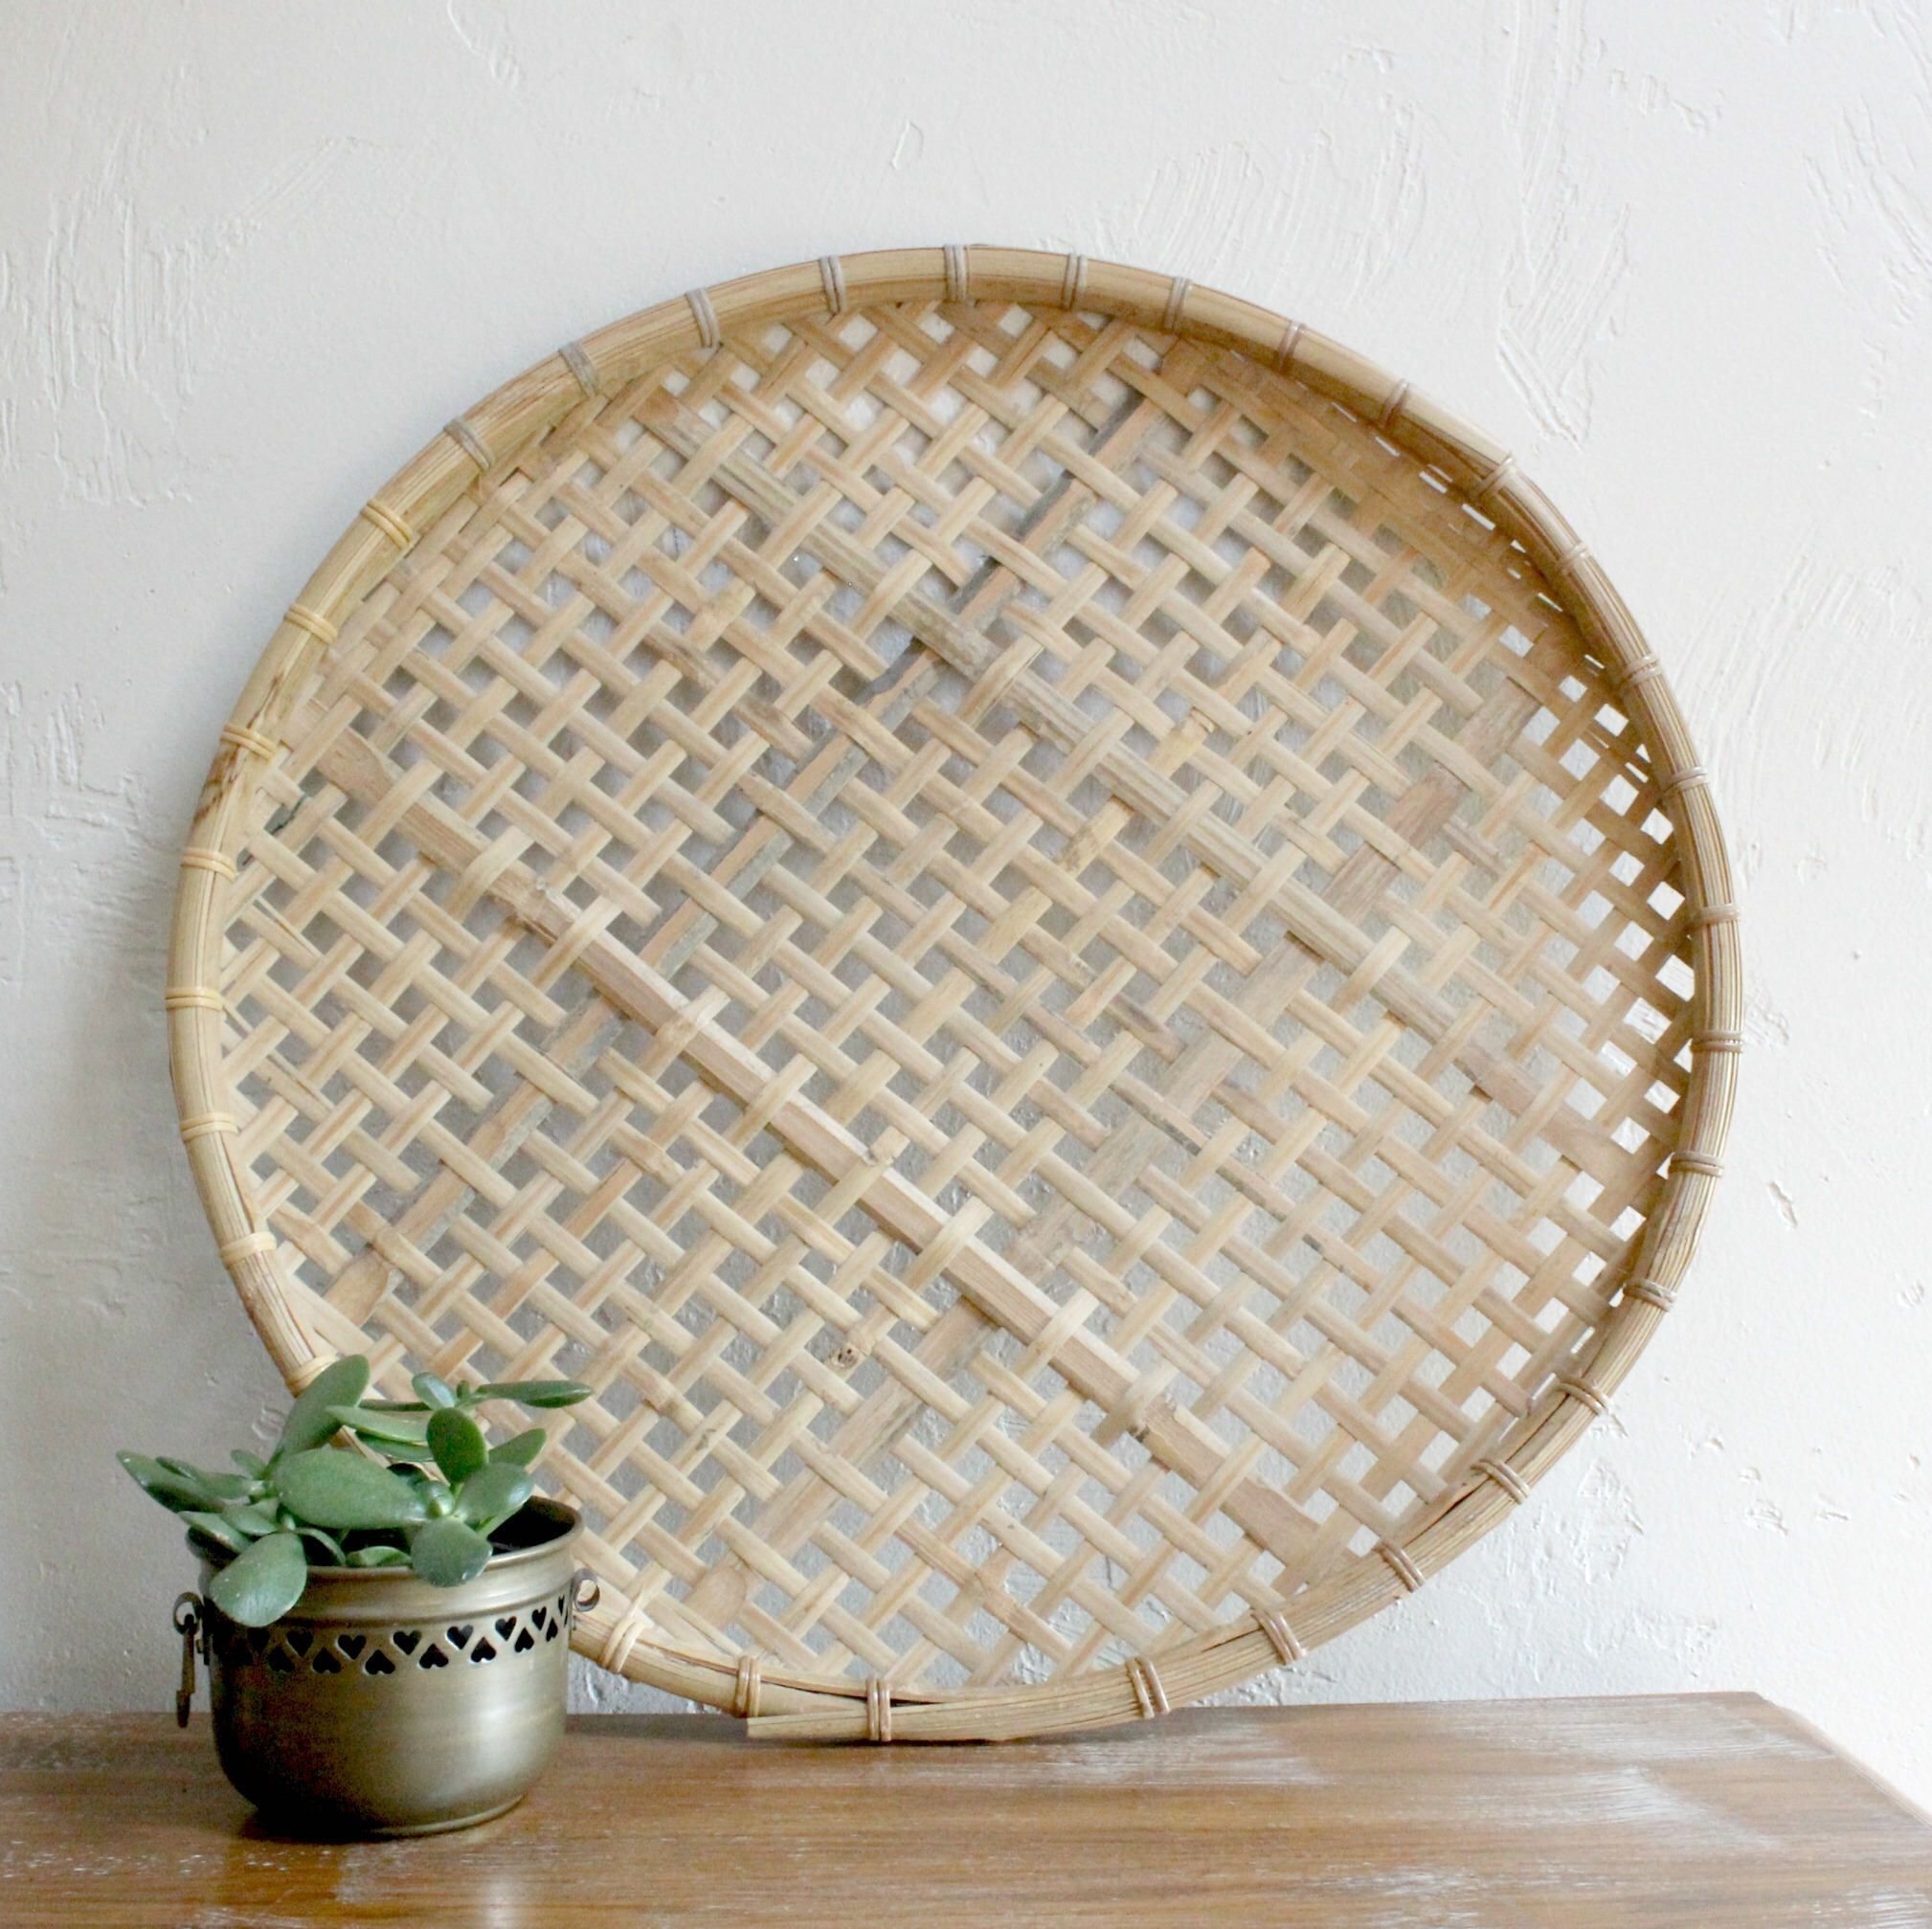 Reserved For Marie Flat Woven Wall Basket Bamboo Basket Large Basket Intended For Woven Basket Wall Art (View 8 of 20)